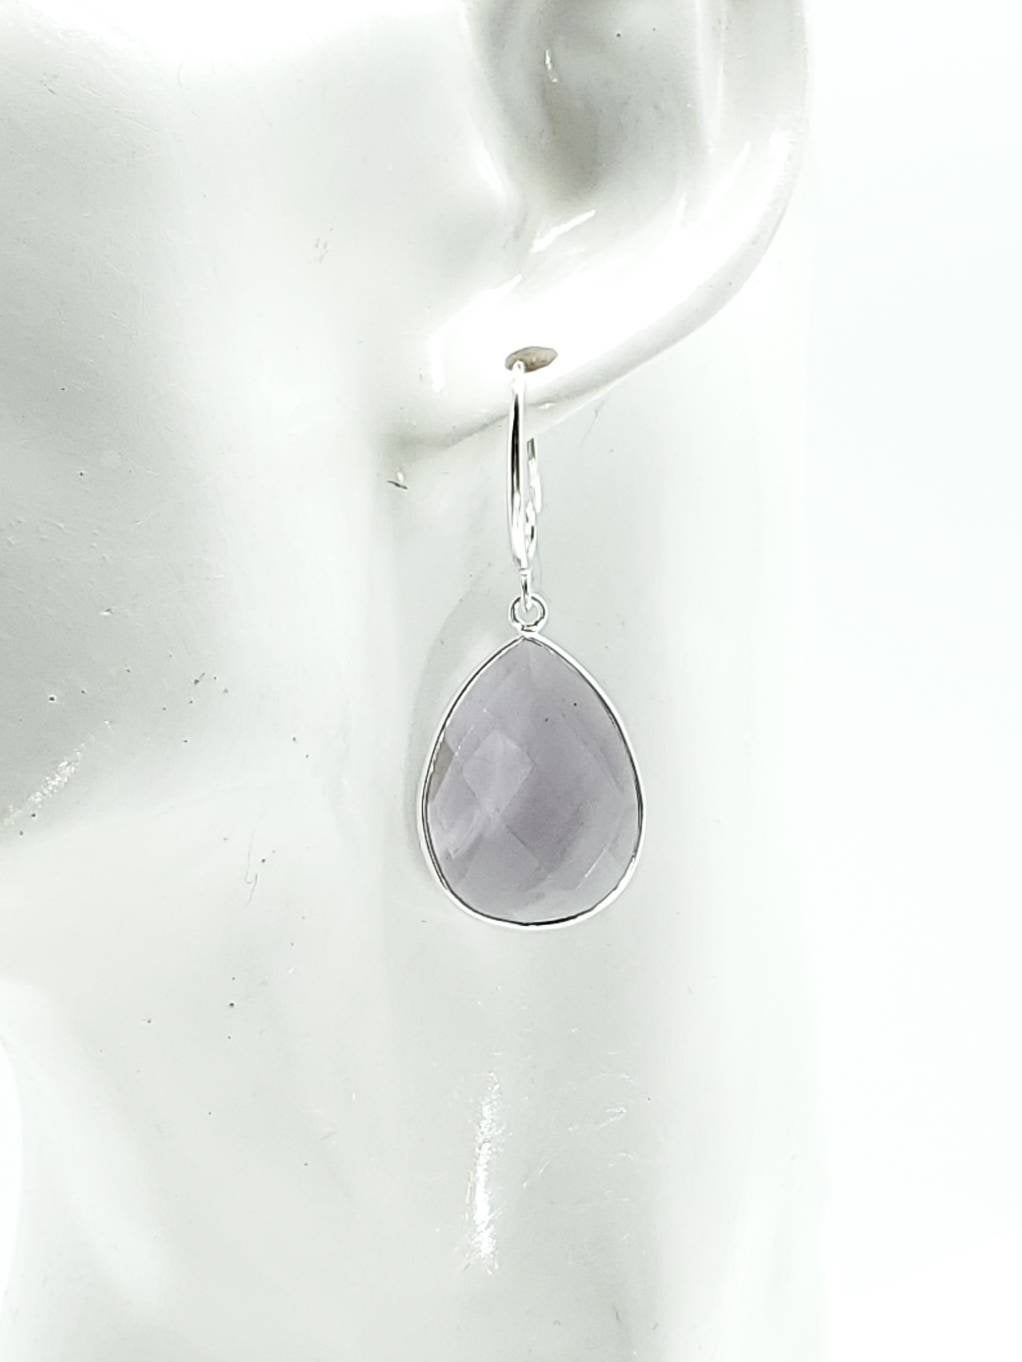 Silver Plated Pear Briolette Amethyst Bezel Earrings on Sterling Silver Ear Wires - The Caffeinated Raven